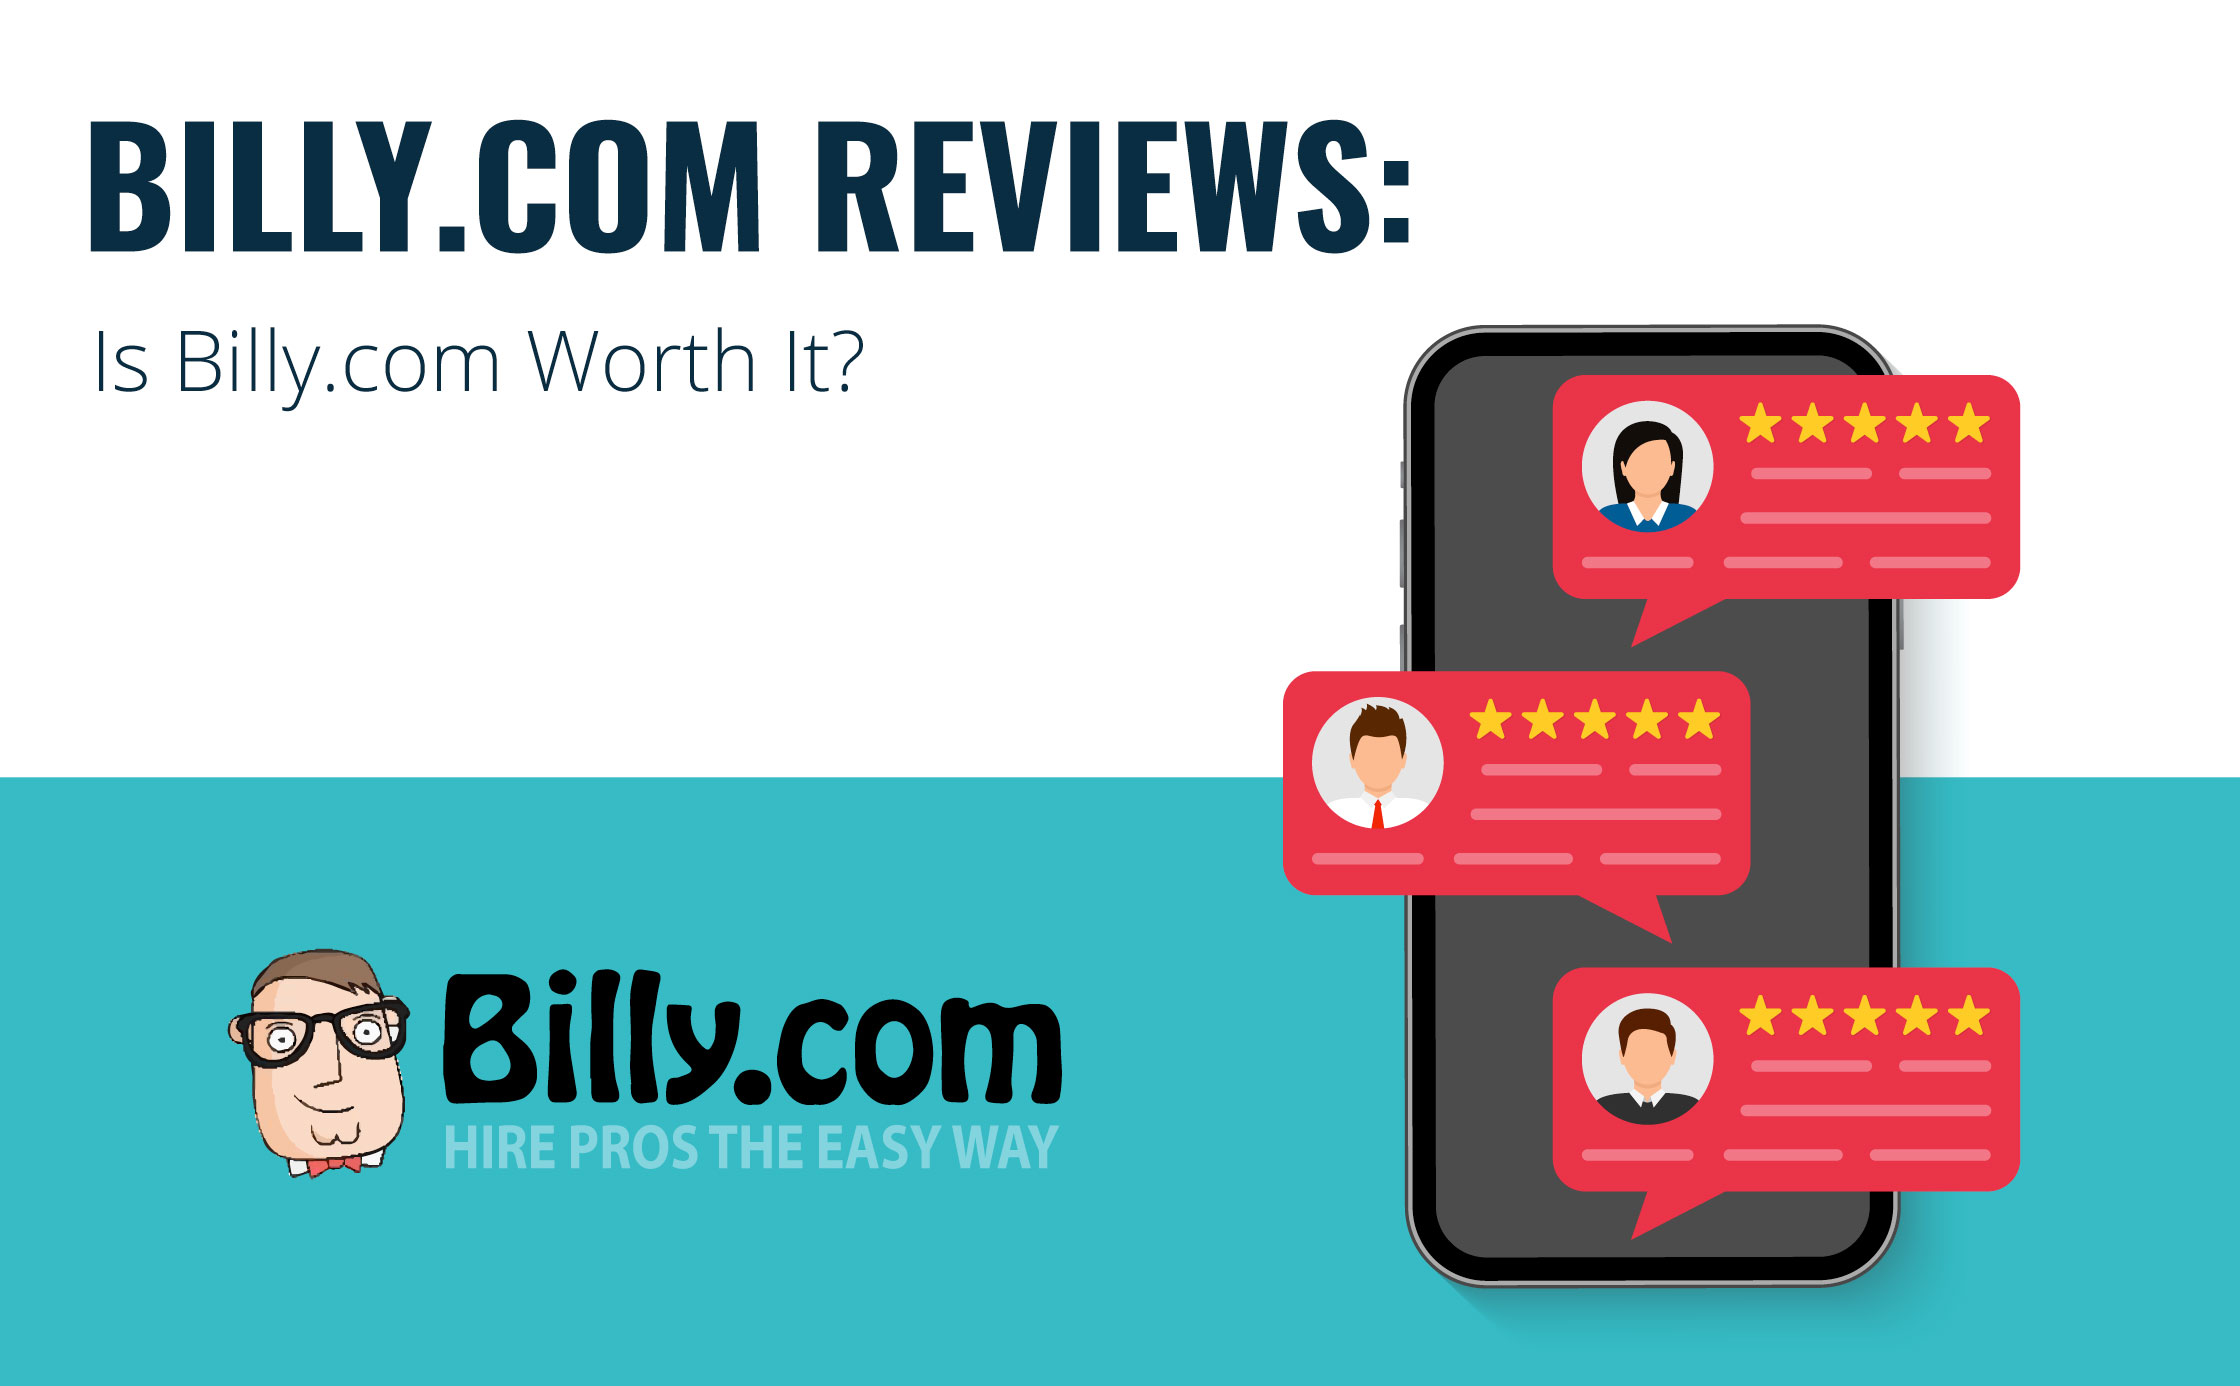 Billy.com Reviews: Is Billy.com Worth It?